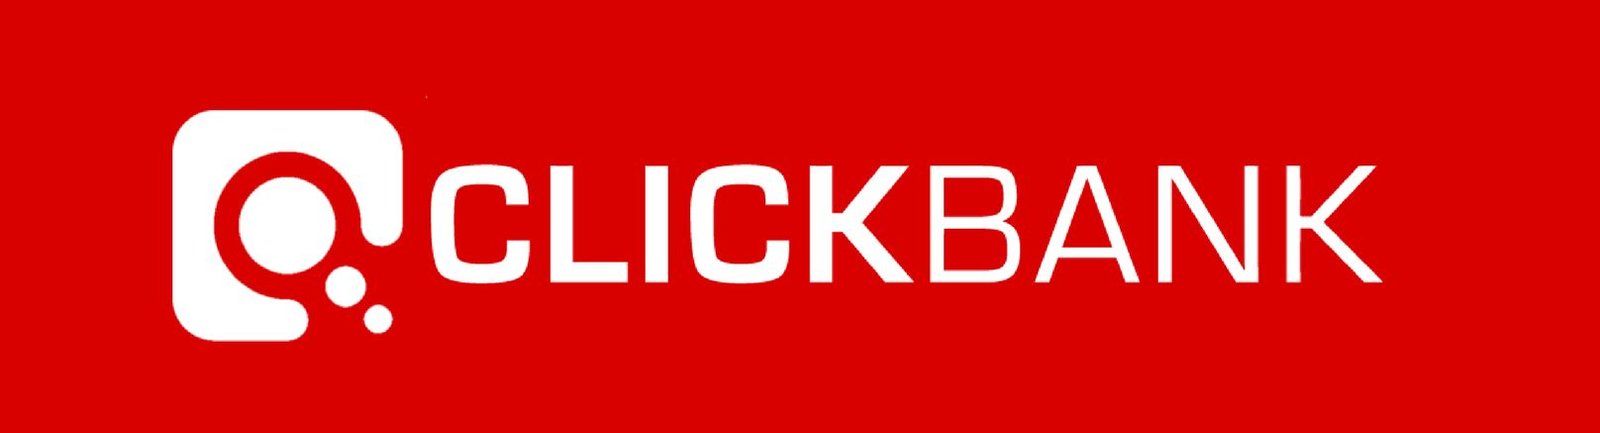 Is It Safe To Give ClickBank My SSN?